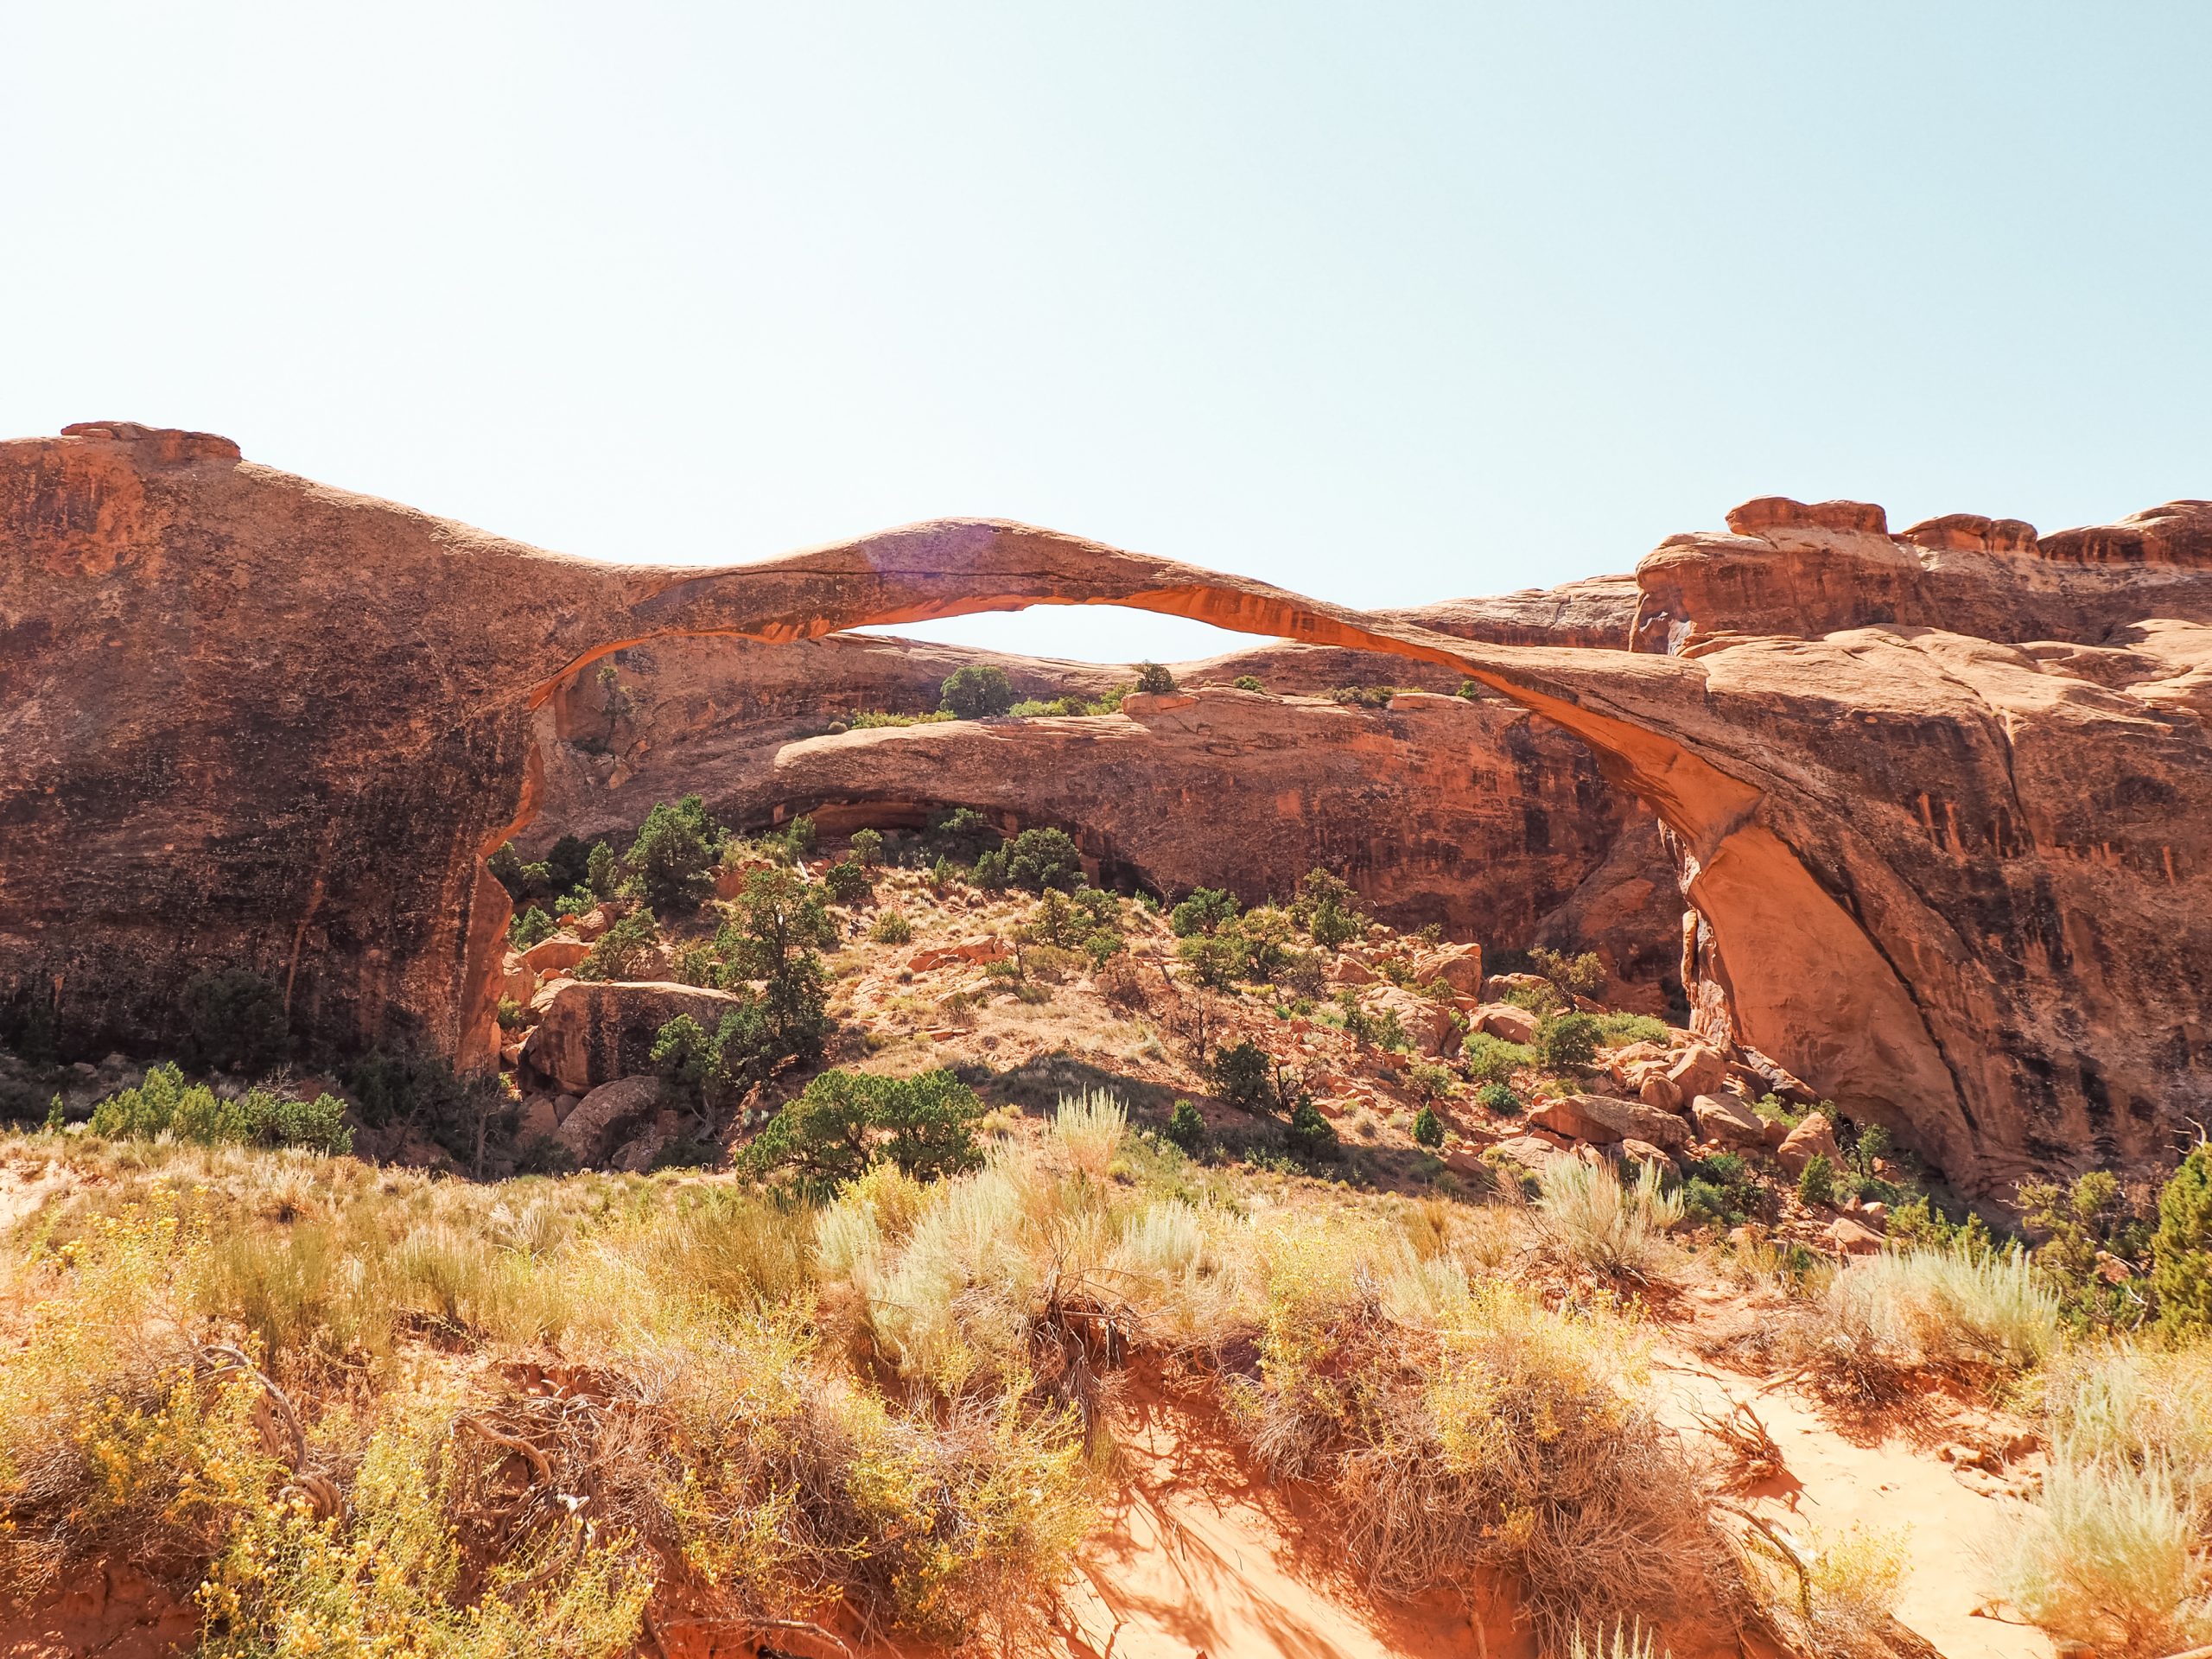 The long arch of Landscape Arch in sunlight